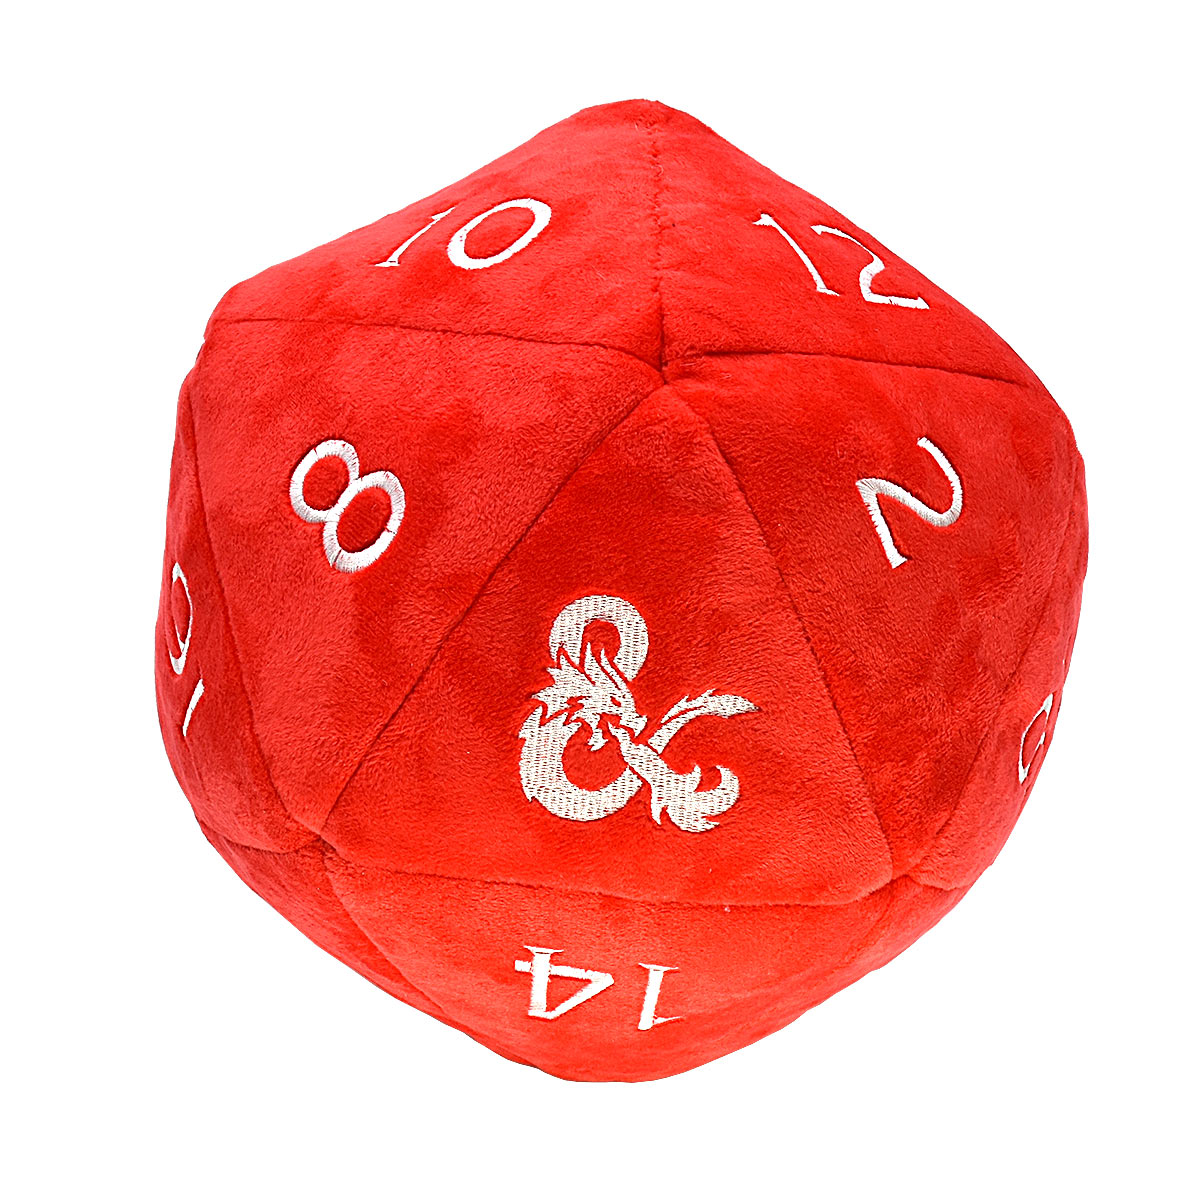 JUMBO 10" PLUSH D20 -Red with White 